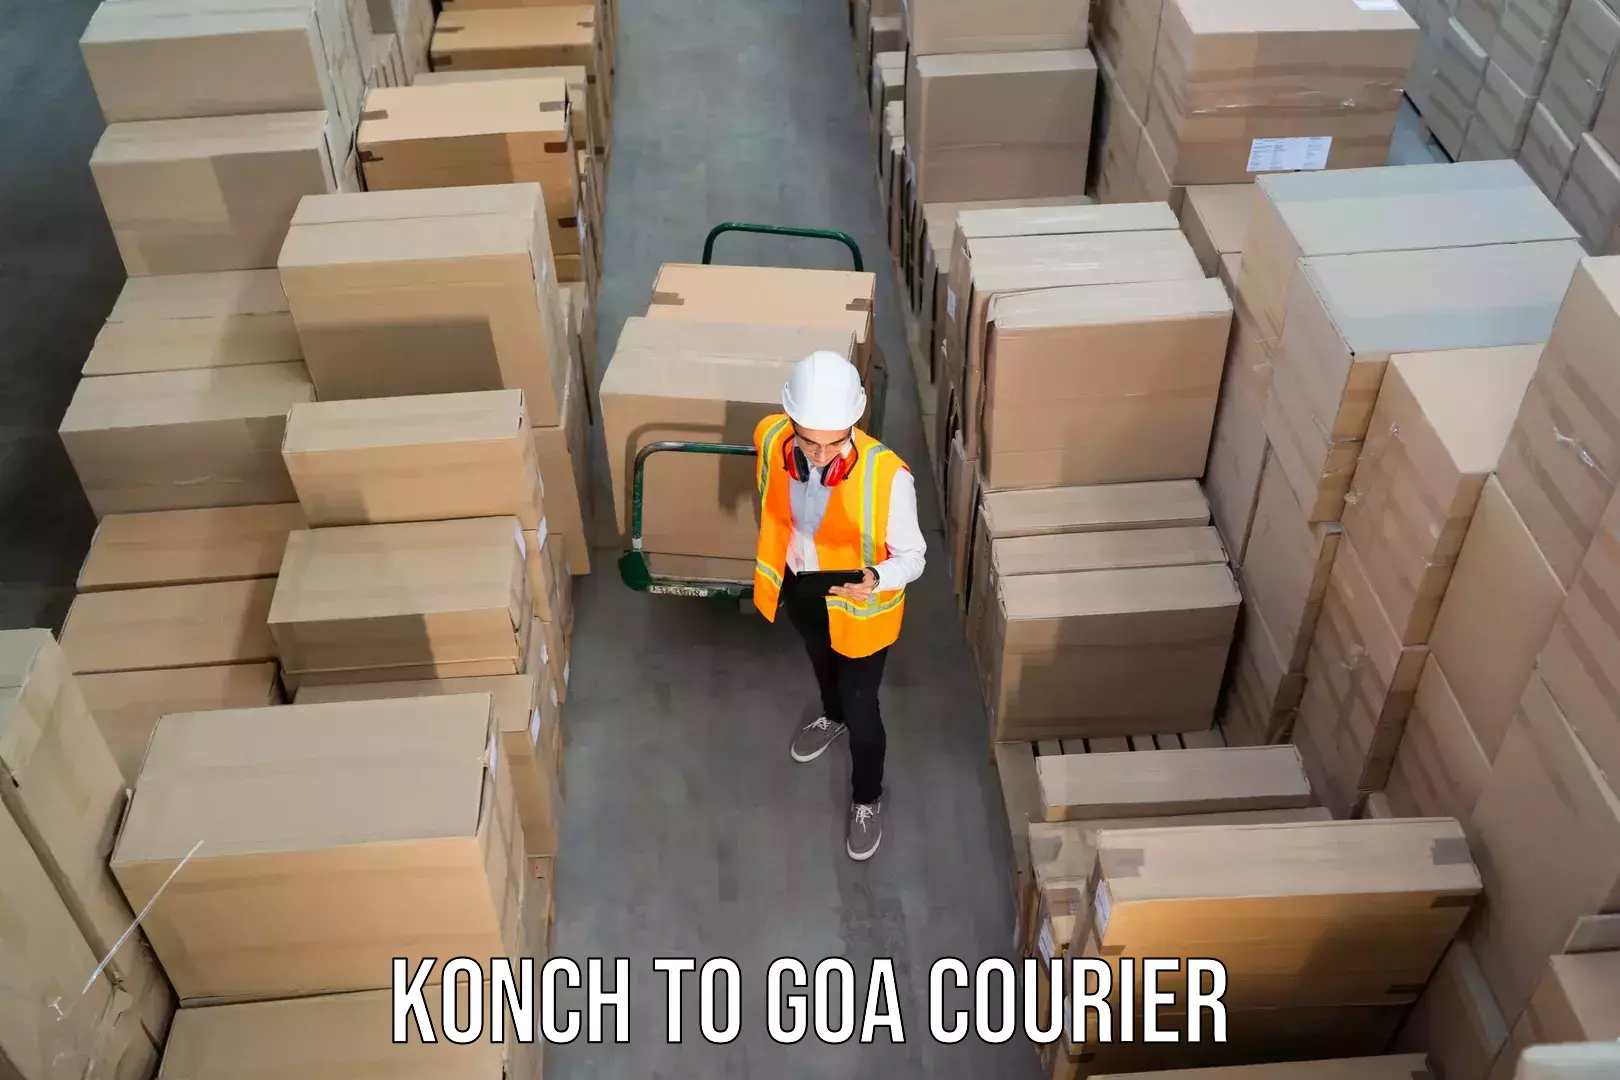 Courier service innovation Konch to Goa